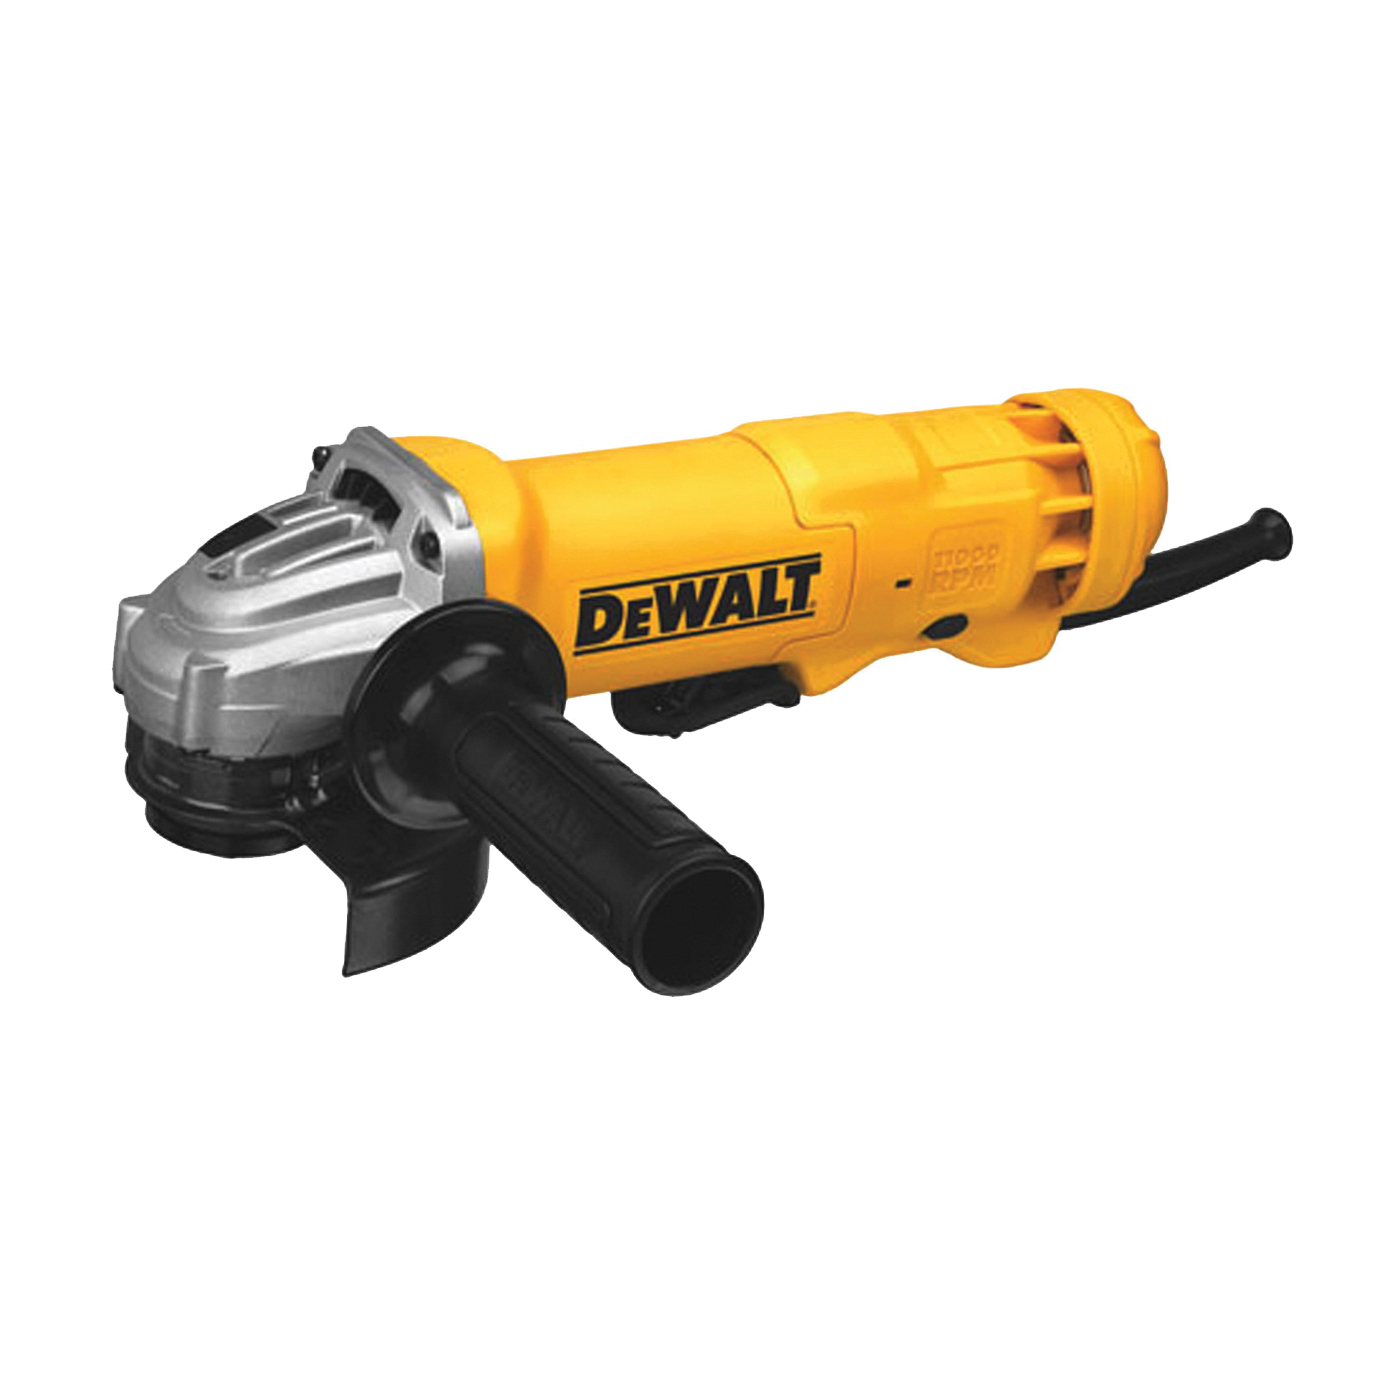 DeWALT DWE402 Small Angle Grinder, 11 A, 5/8-11 Spindle, 4-1/2 in Dia Wheel, 11,000 rpm Speed - 6